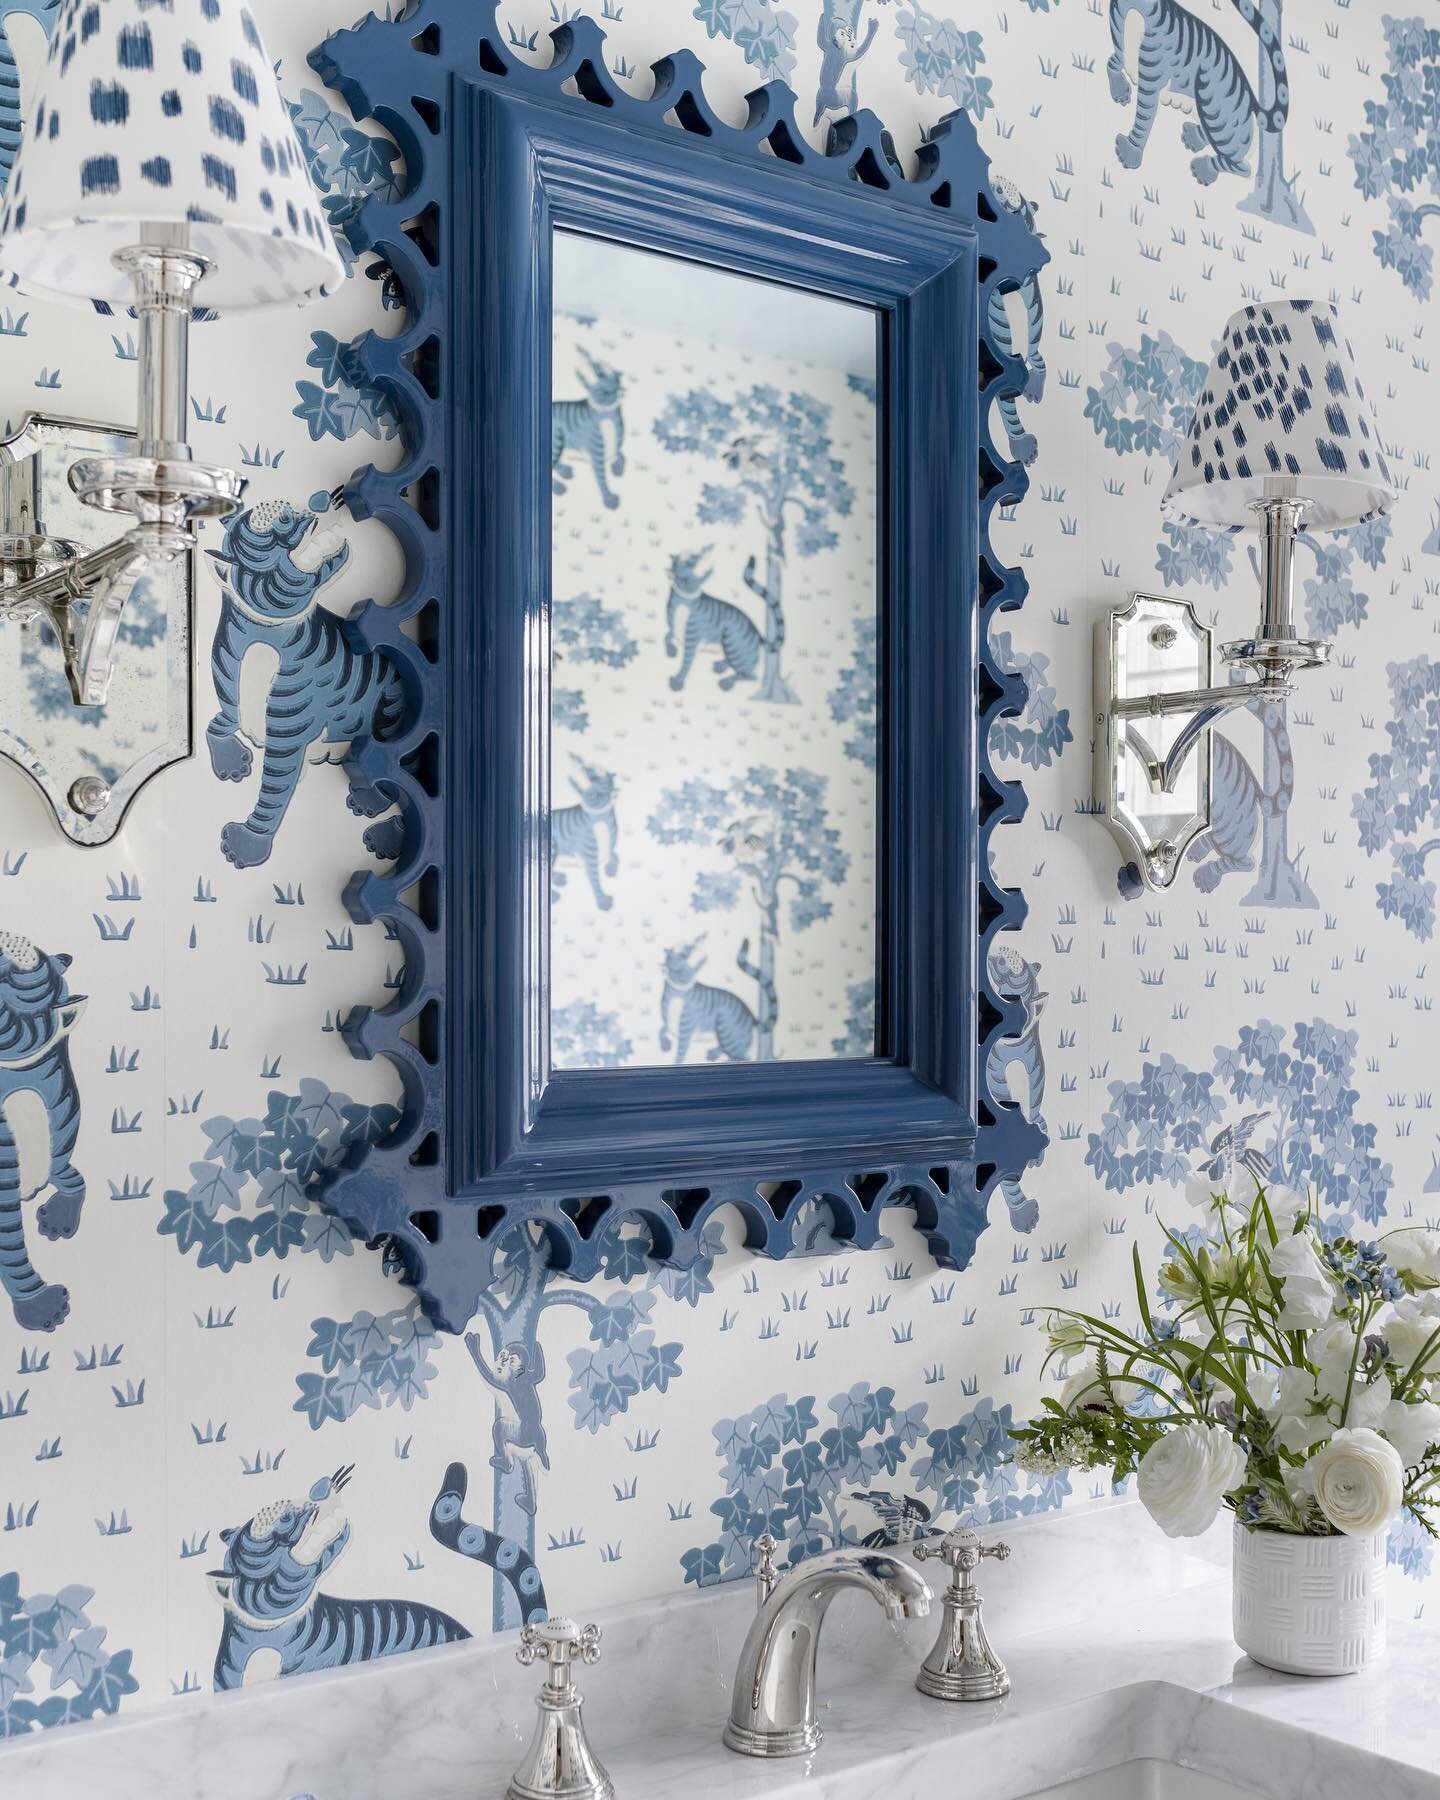 Blue beauty 💙 Loving the #blueandwhite pattern play in this client&rsquo;s pretty powder room! &hellip;&hellip;&hellip;&hellip;&hellip;&hellip;&hellip;&hellip;&hellip;&hellip;&hellip;&hellip;&hellip;&hellip;&hellip;&hellip;&hellip;&hellip;&hellip;&h